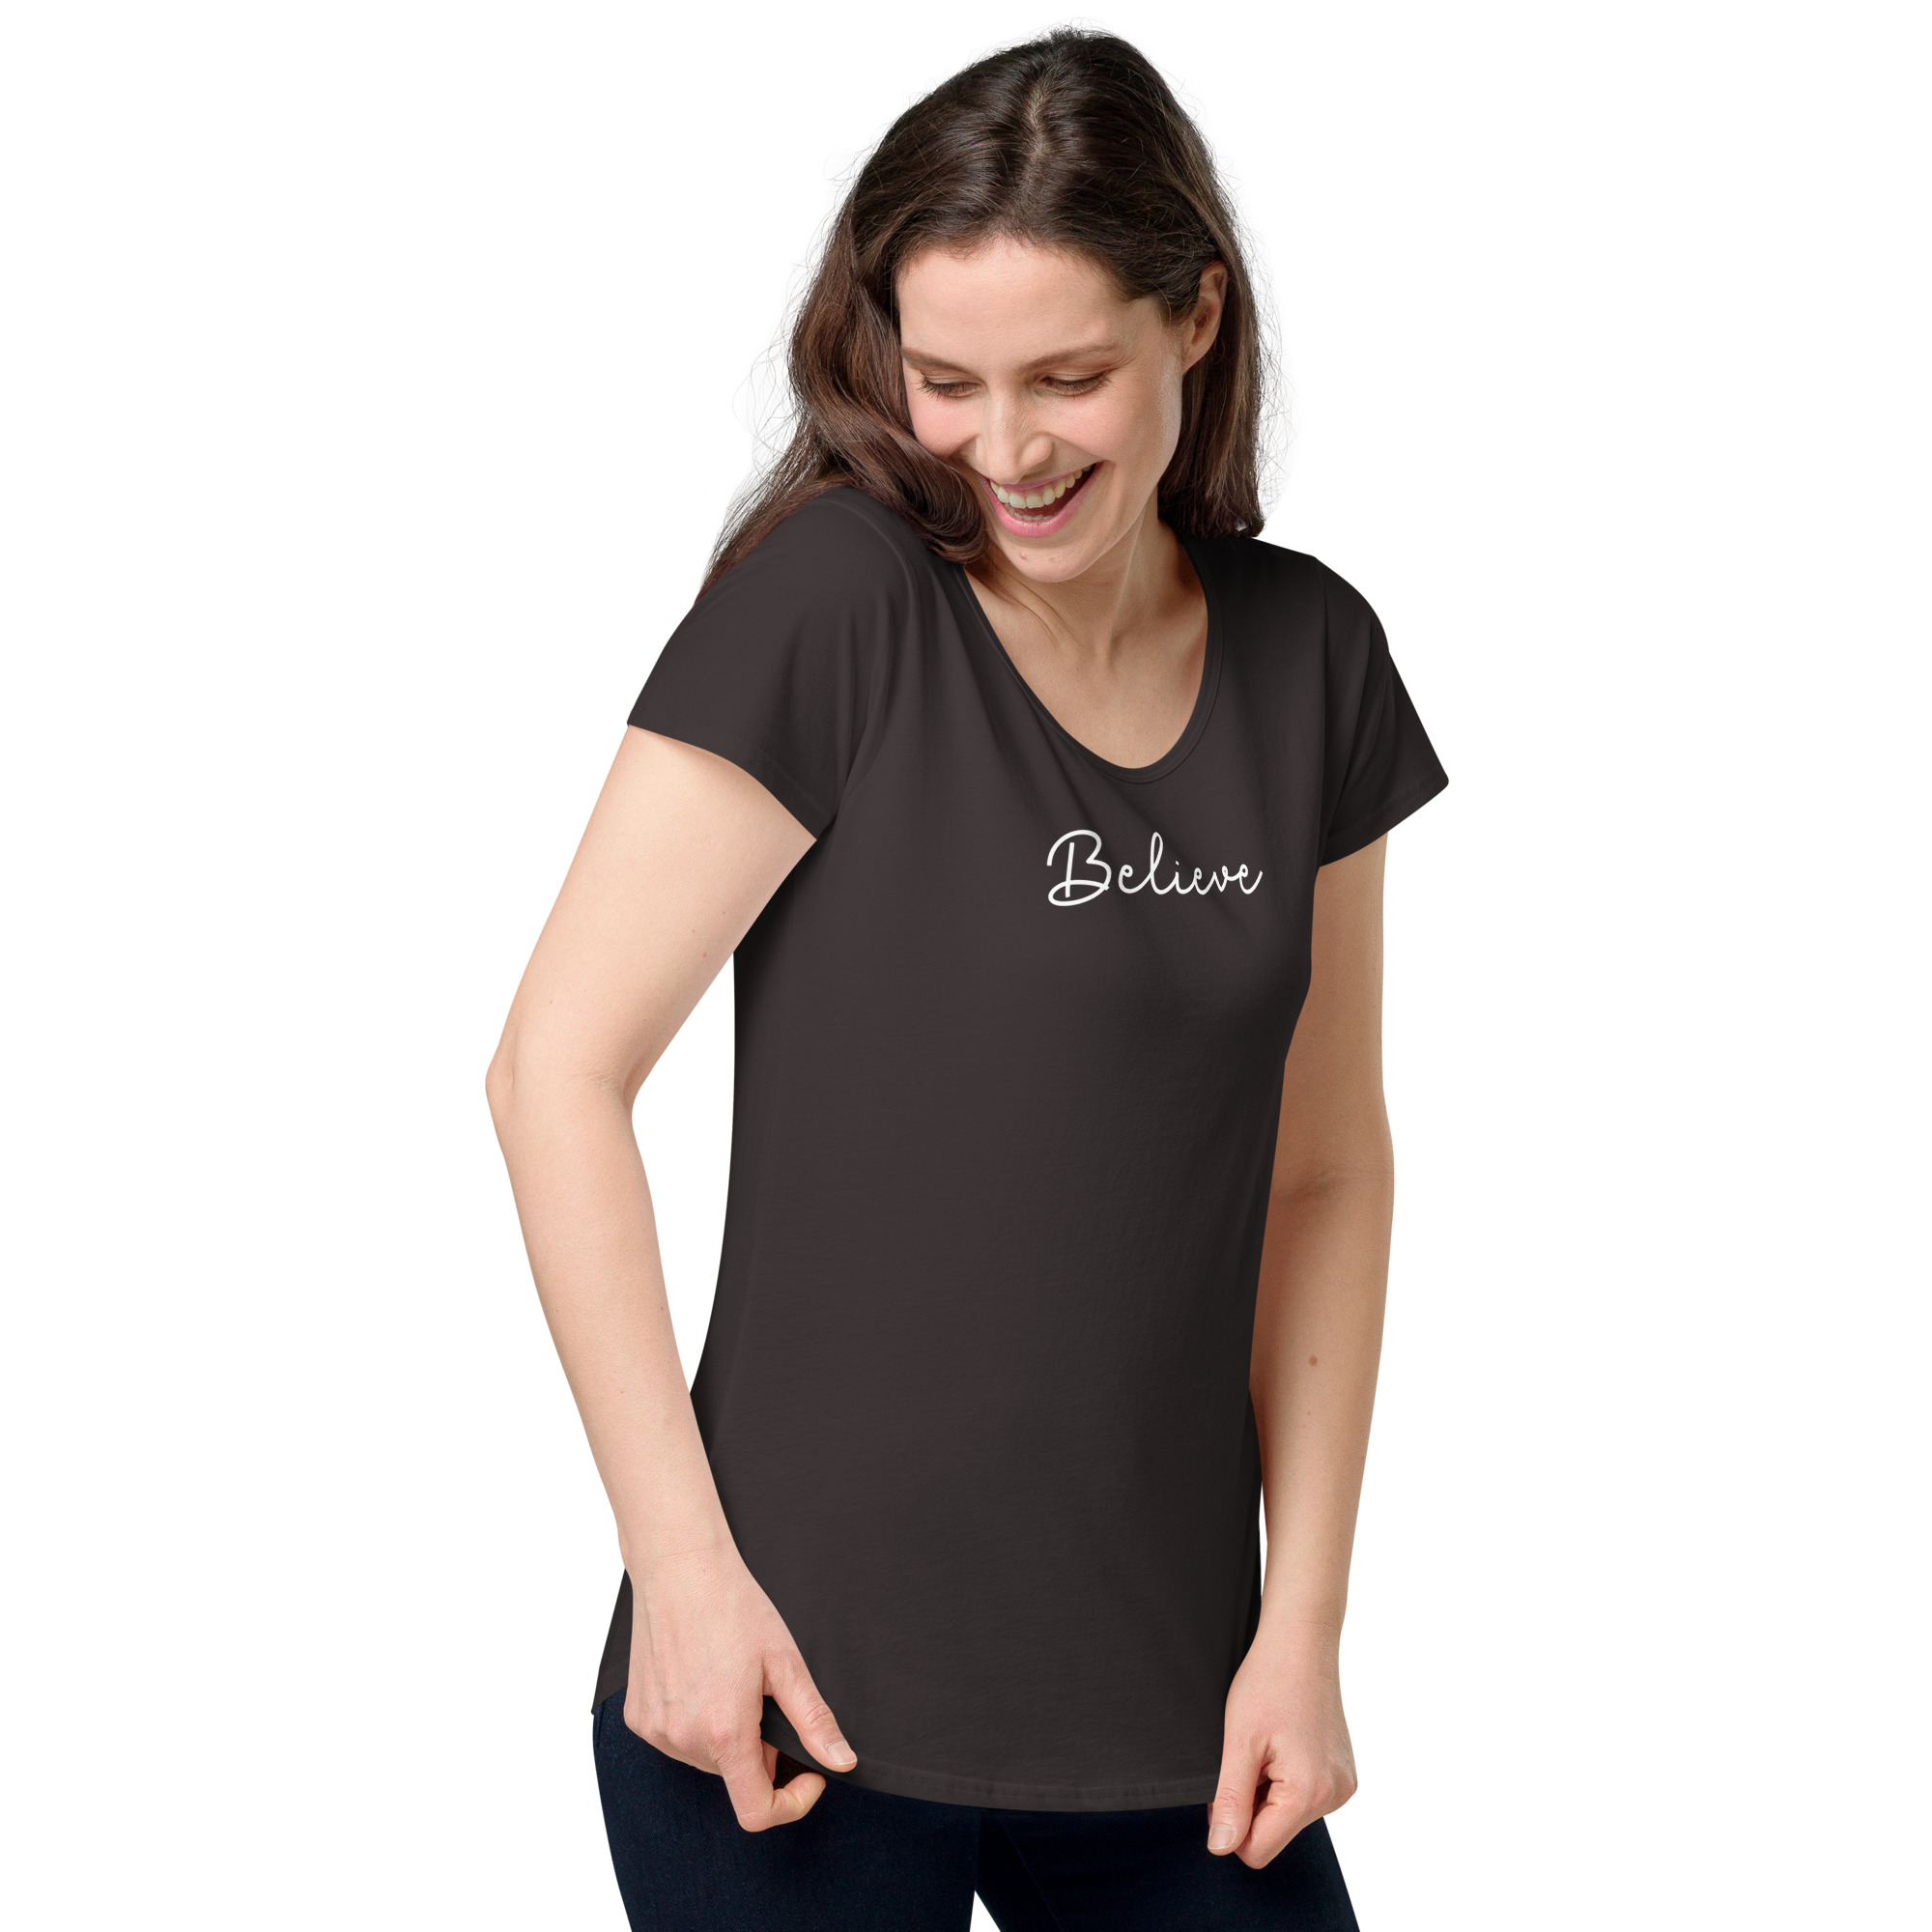 womens-round-neck-tee-coal-right-front-634dd8771a37b.jpg